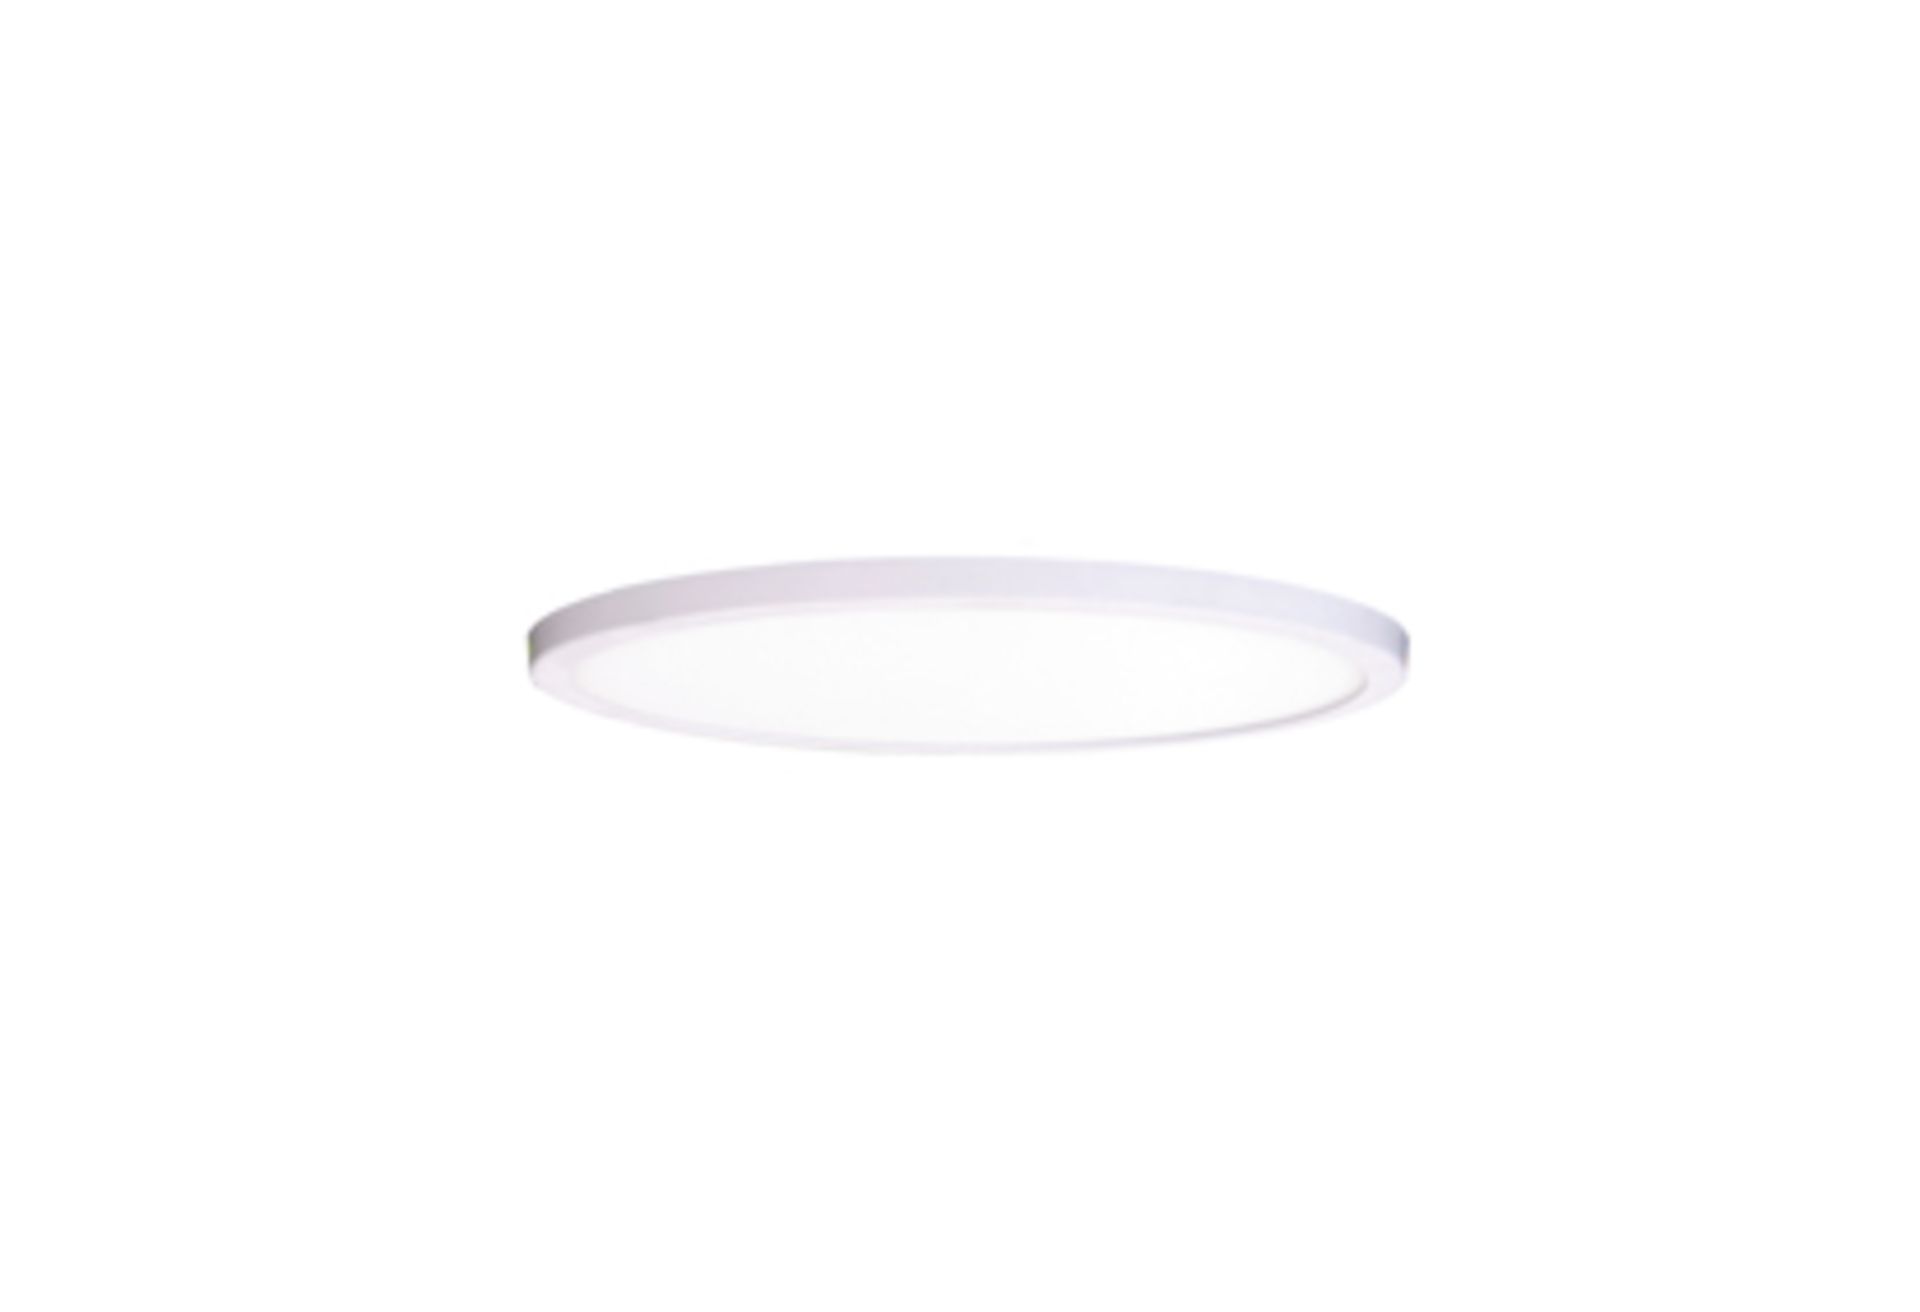 100 8w 586LM small circular Panels, product code T4CLP0586EZ - Image 4 of 5